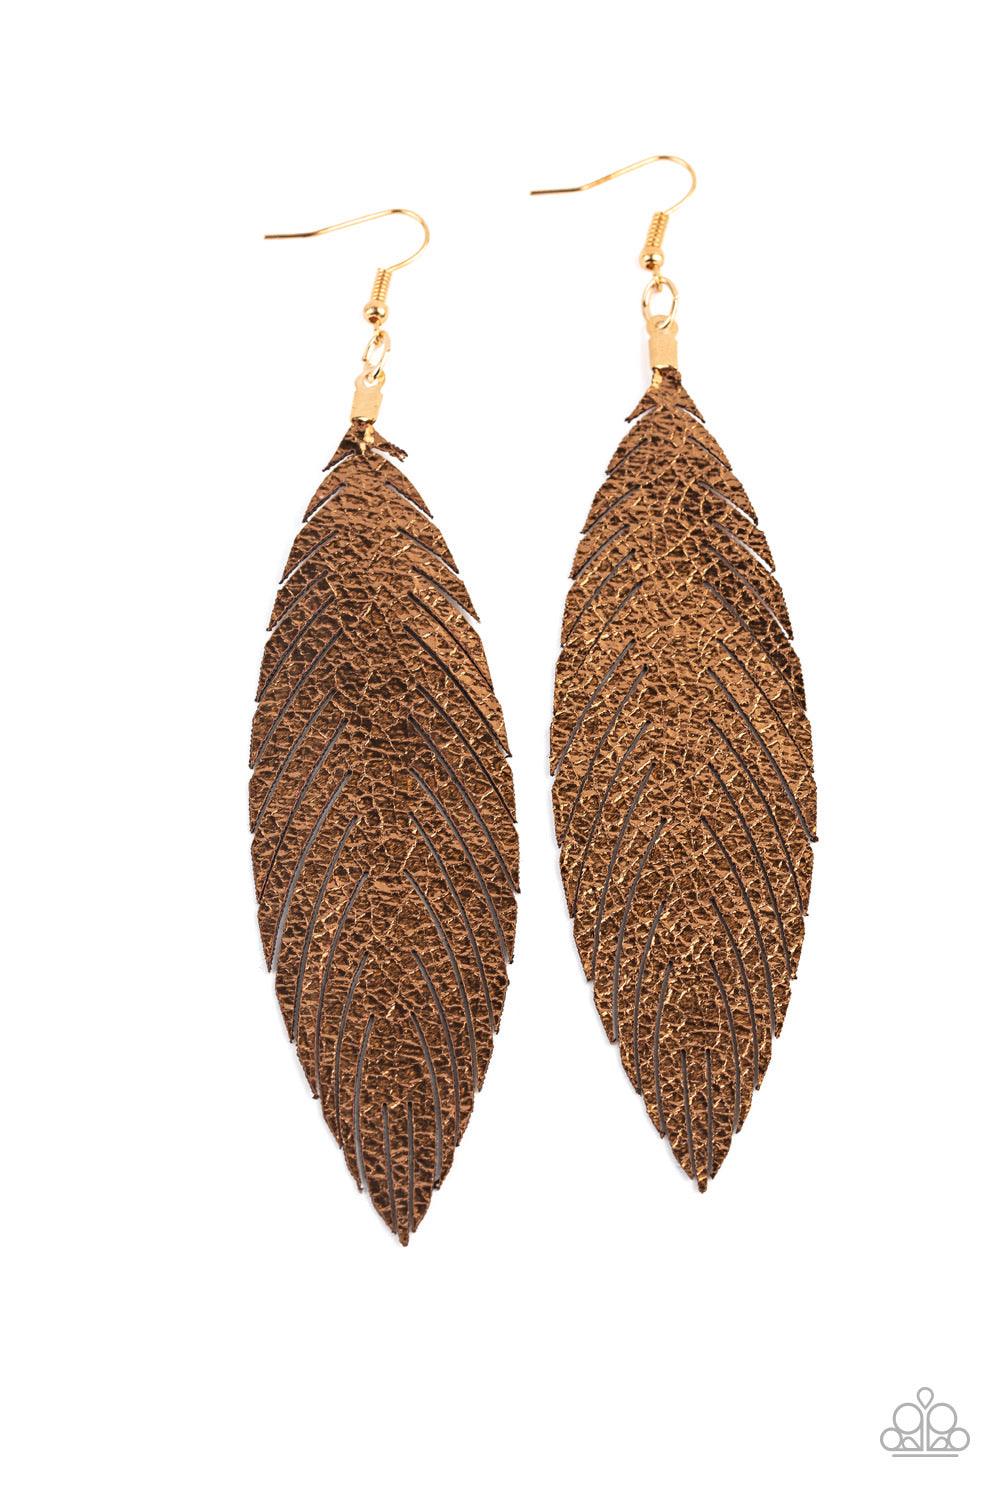 Paparazzi Accessories Feather Fantasy - Gold Brushed in a golden metallic finish, a flat leather feather frame swings from the ear for a statement-making finish. Earring attaches to a standard fishhook fitting. Sold as one pair of earrings. Jewelry